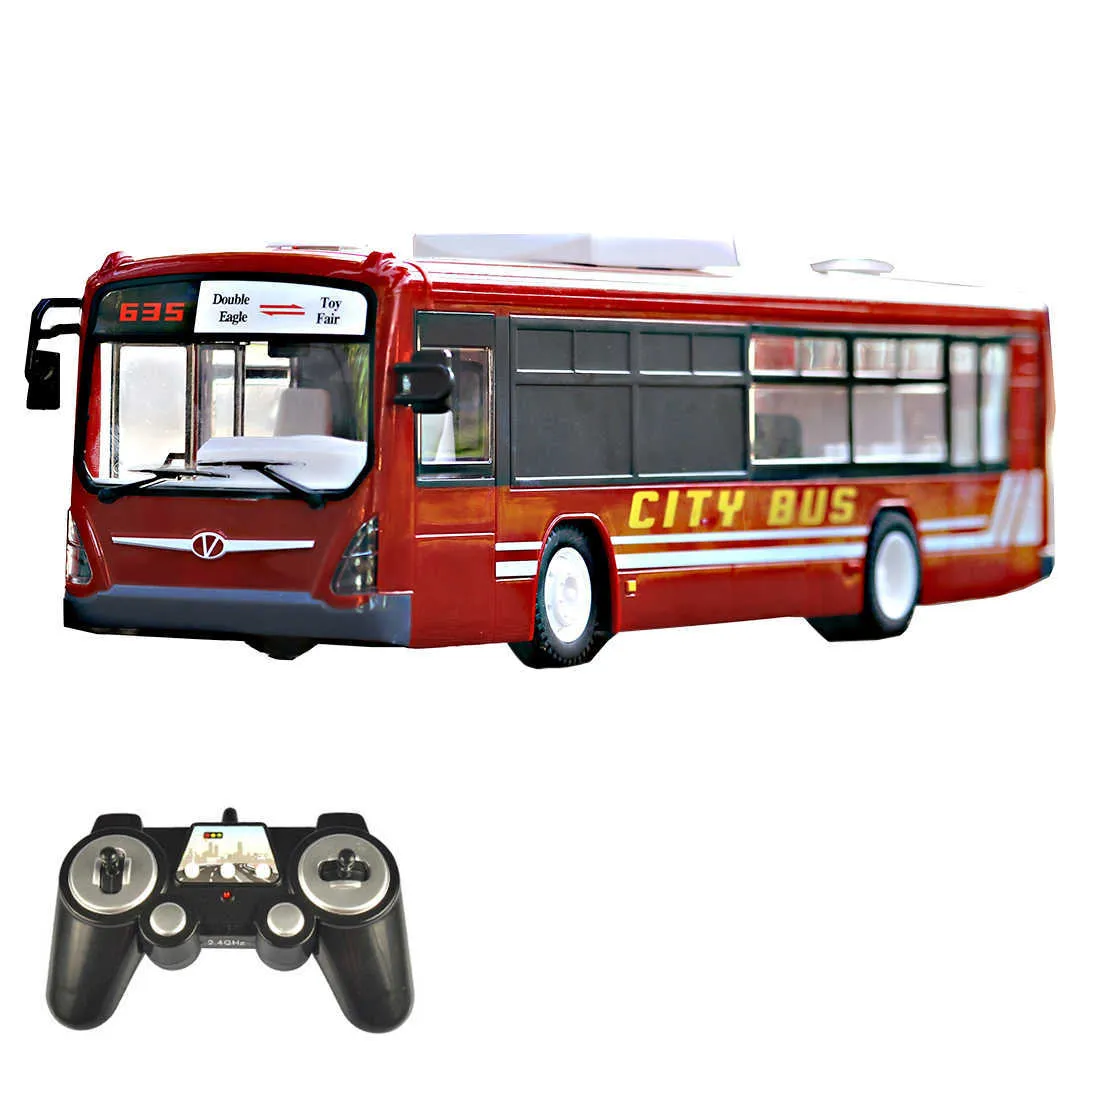 2.4G RC Car Bus City Express Model RC Toy Car With Realistic Light And Sound - Red Q0726